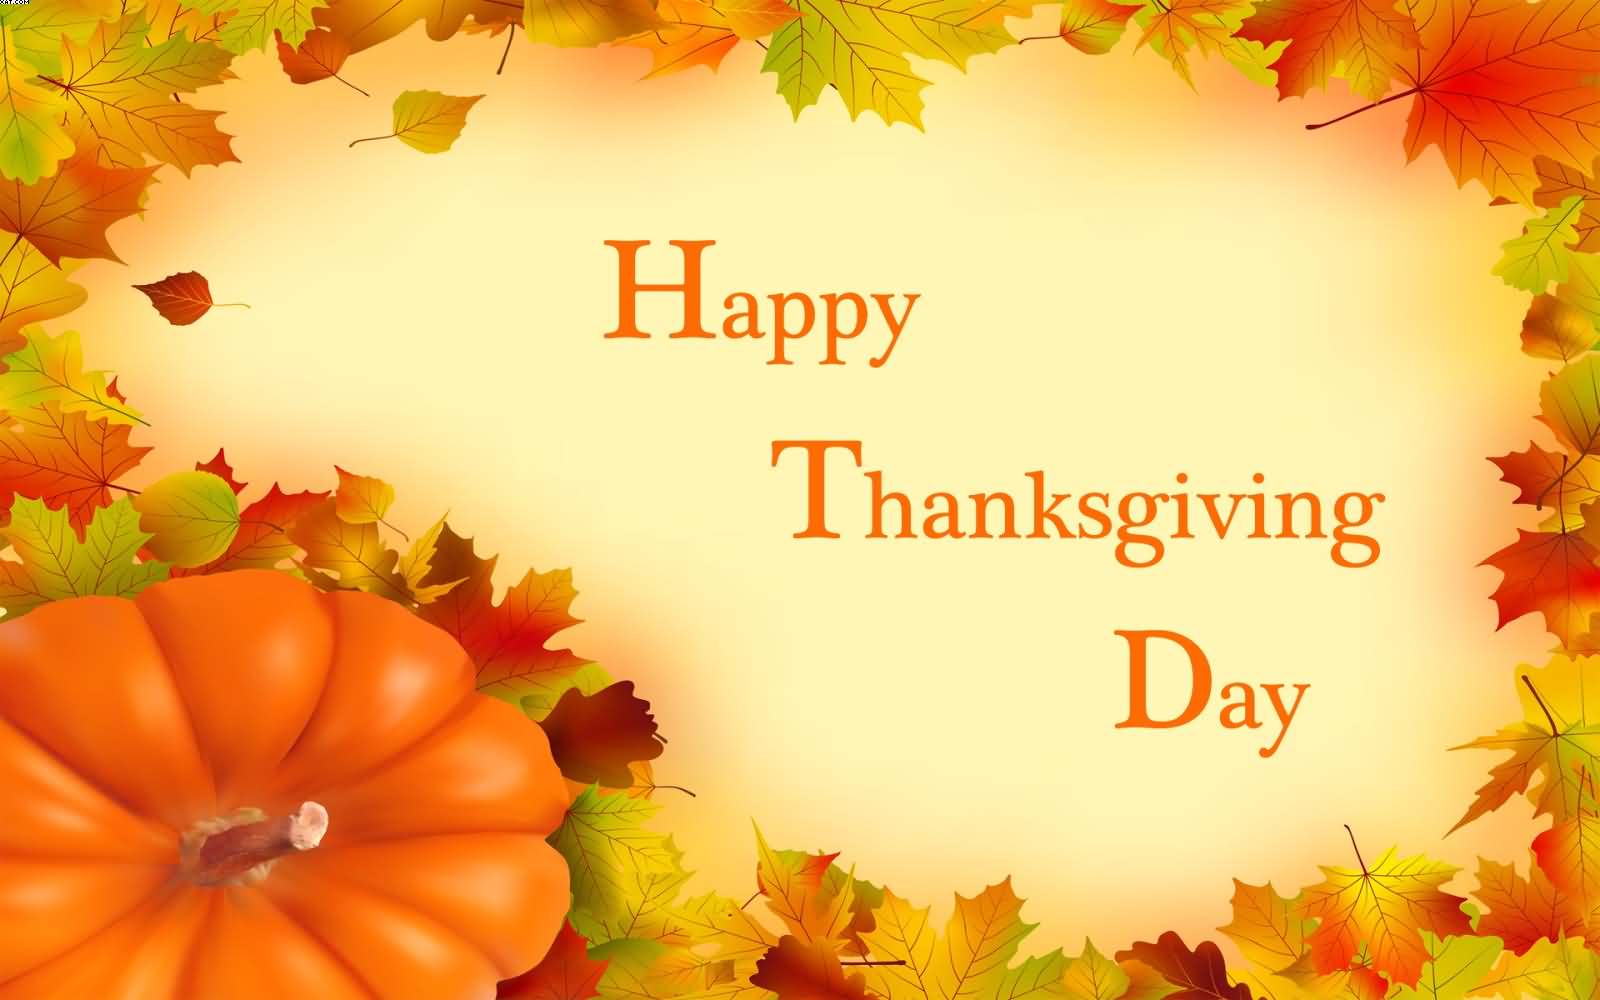 Happy Thanksgiving Day To You And Your Family wishes wallpaper